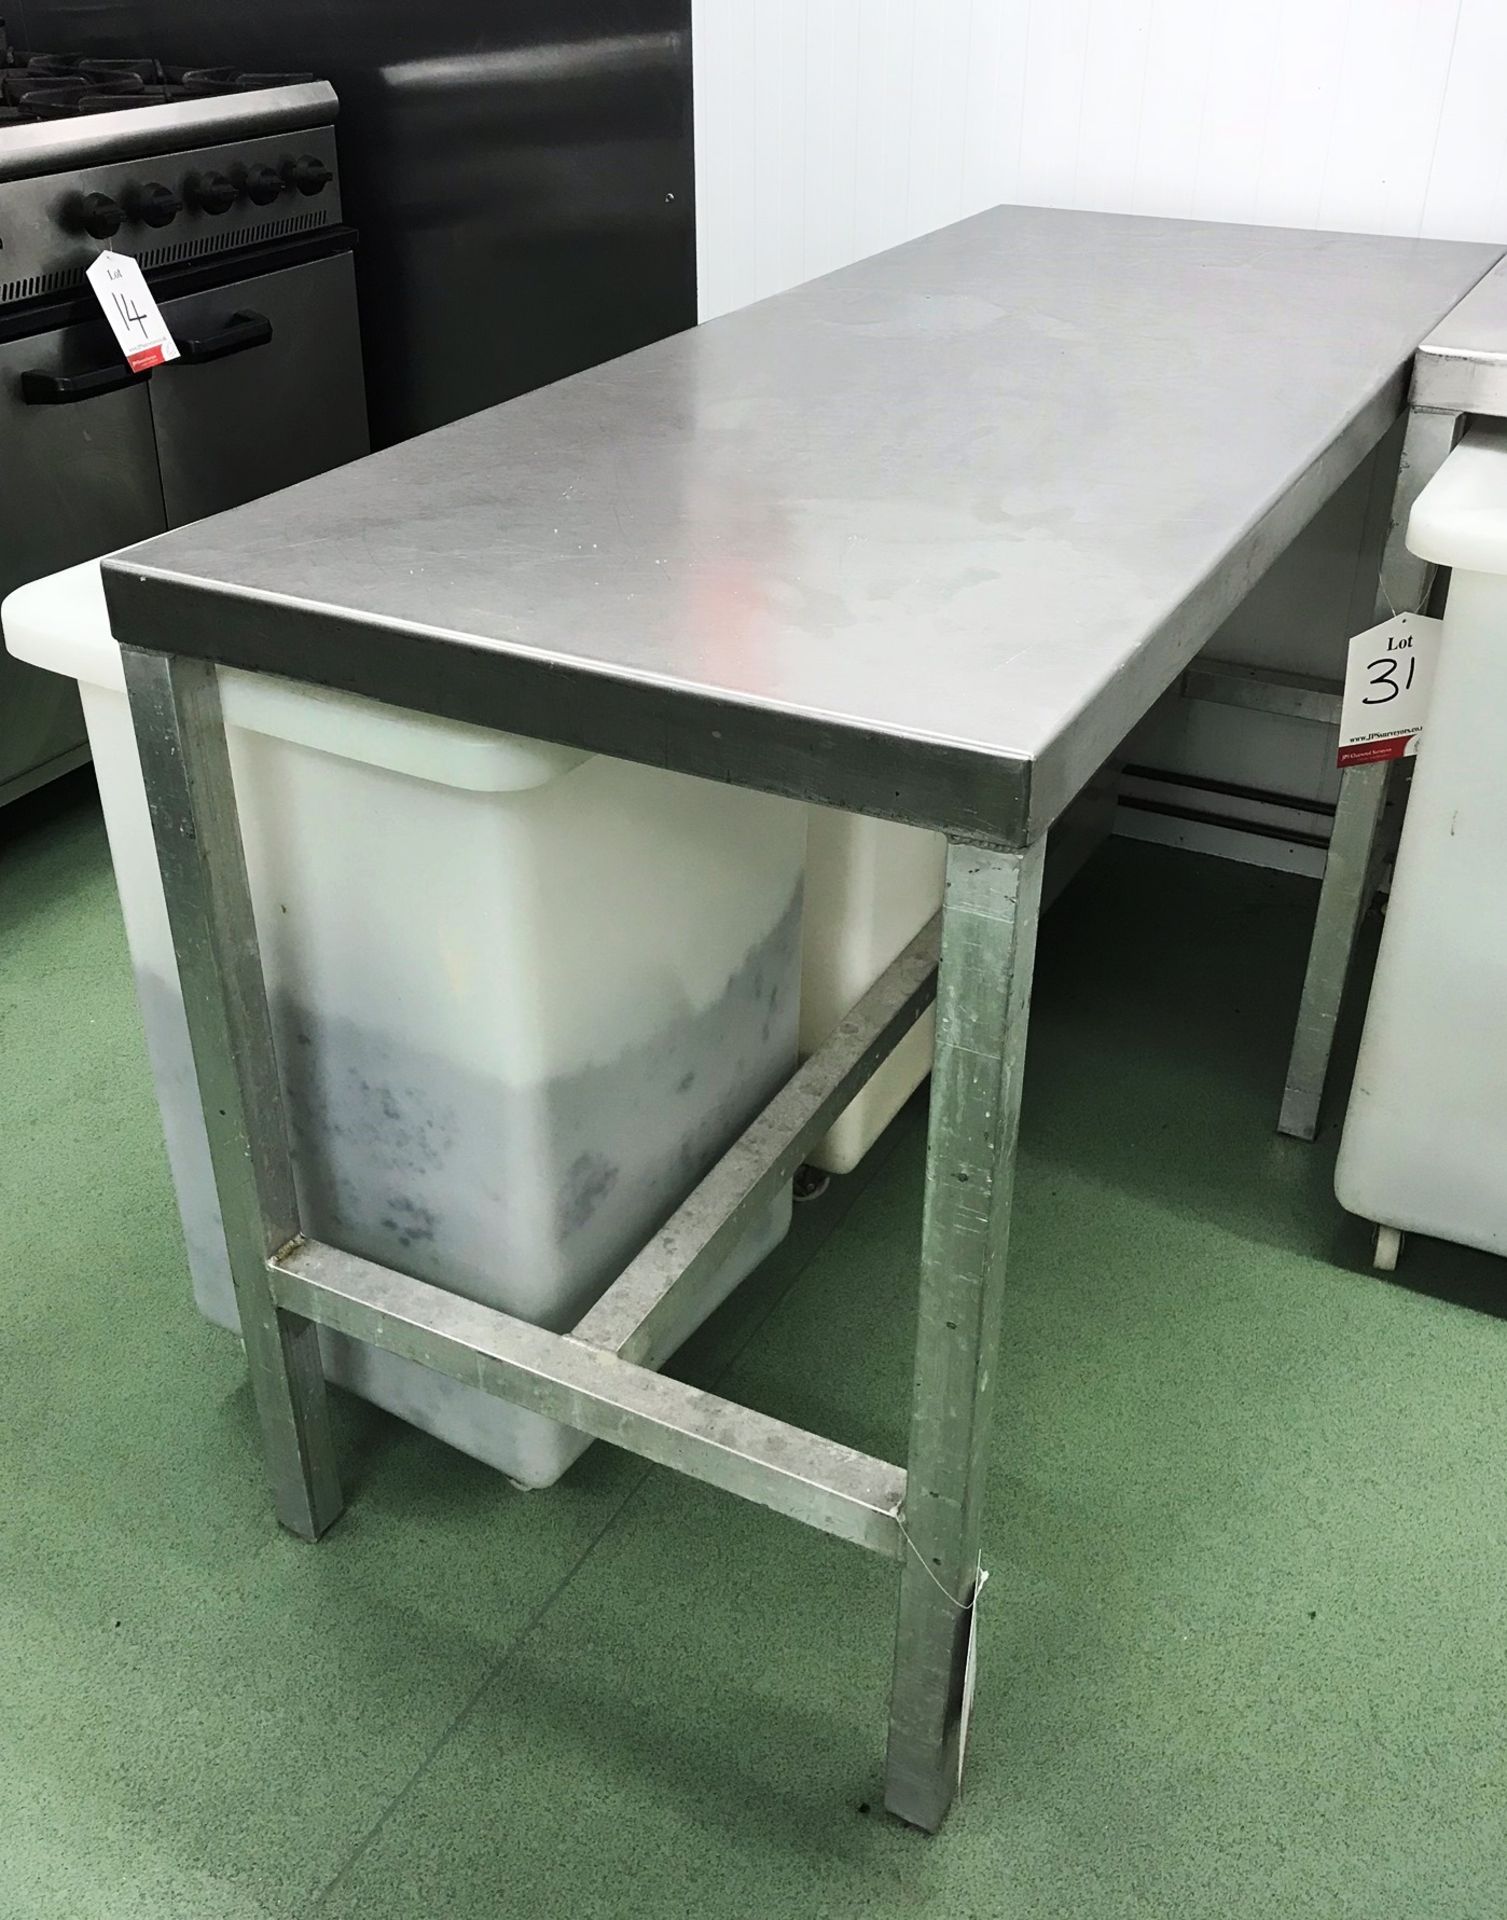 Stainless Steel Preparation Table - 1520mm Length